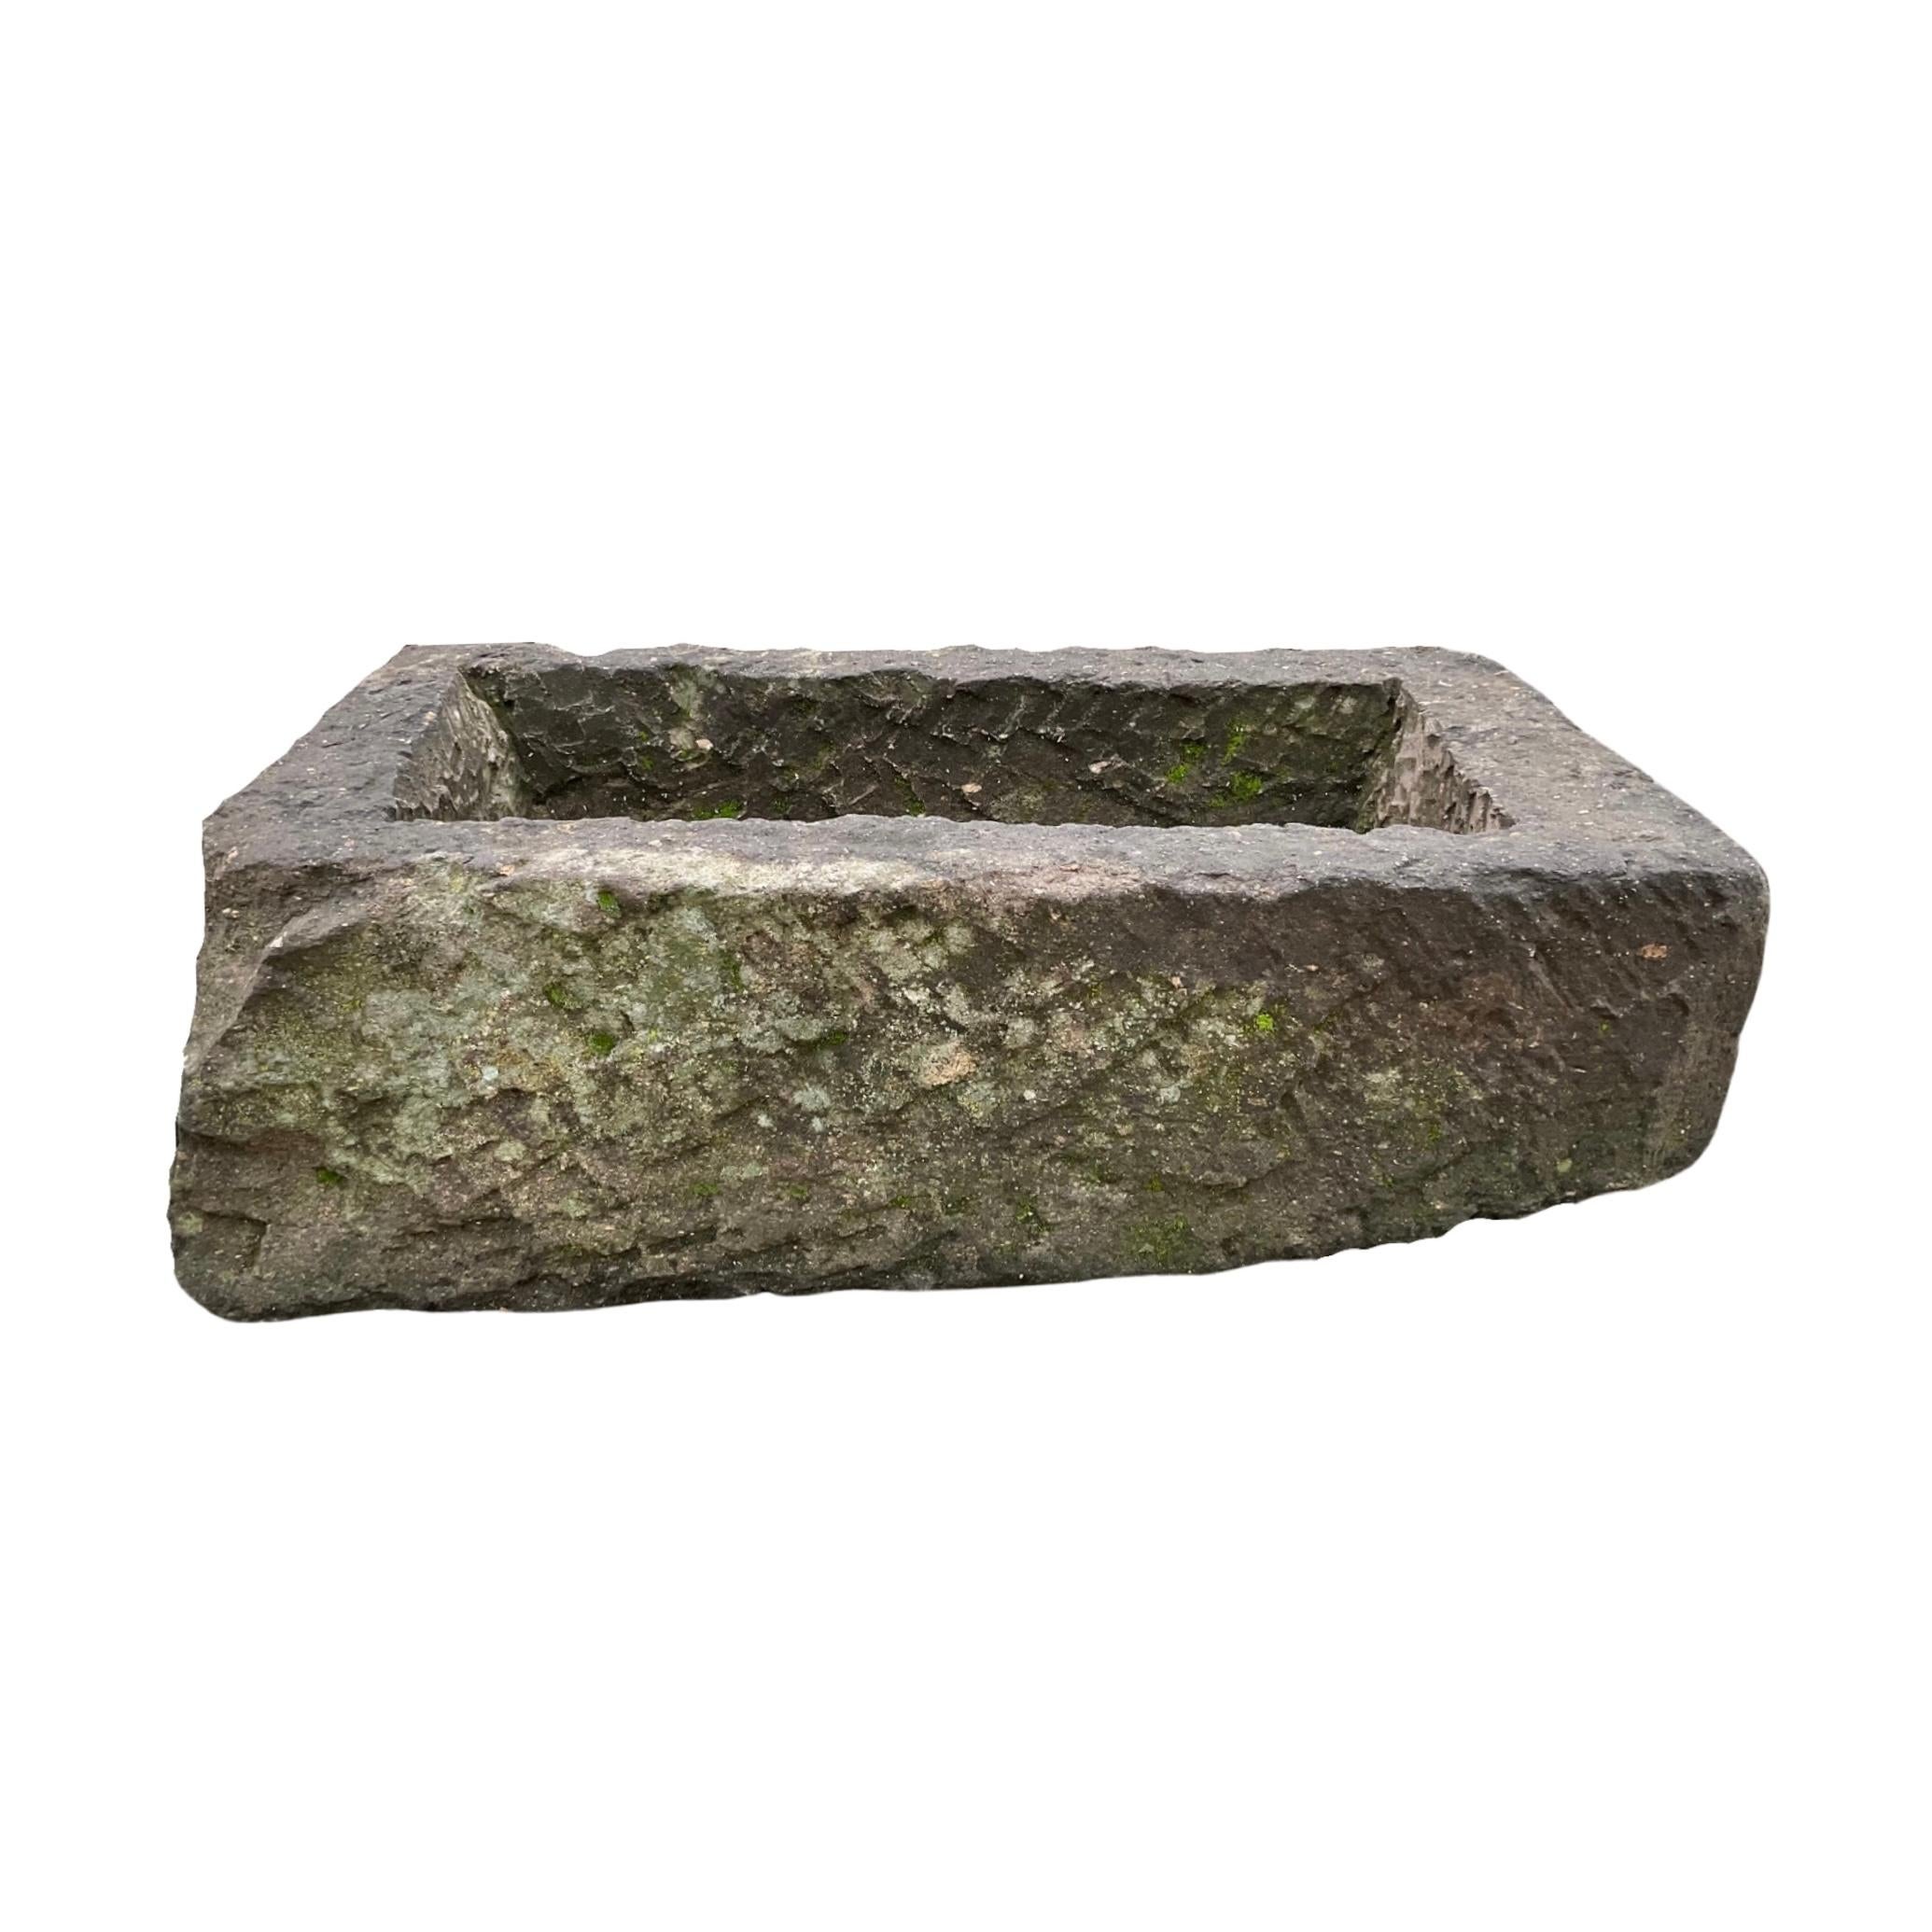 This 18th century French limestone trough is a versatile addition to any garden. Its small style design and predrilled drainage hole make it ideal for a variety of plants or even to serve as a fountain. Crafted with high-quality limestone, this